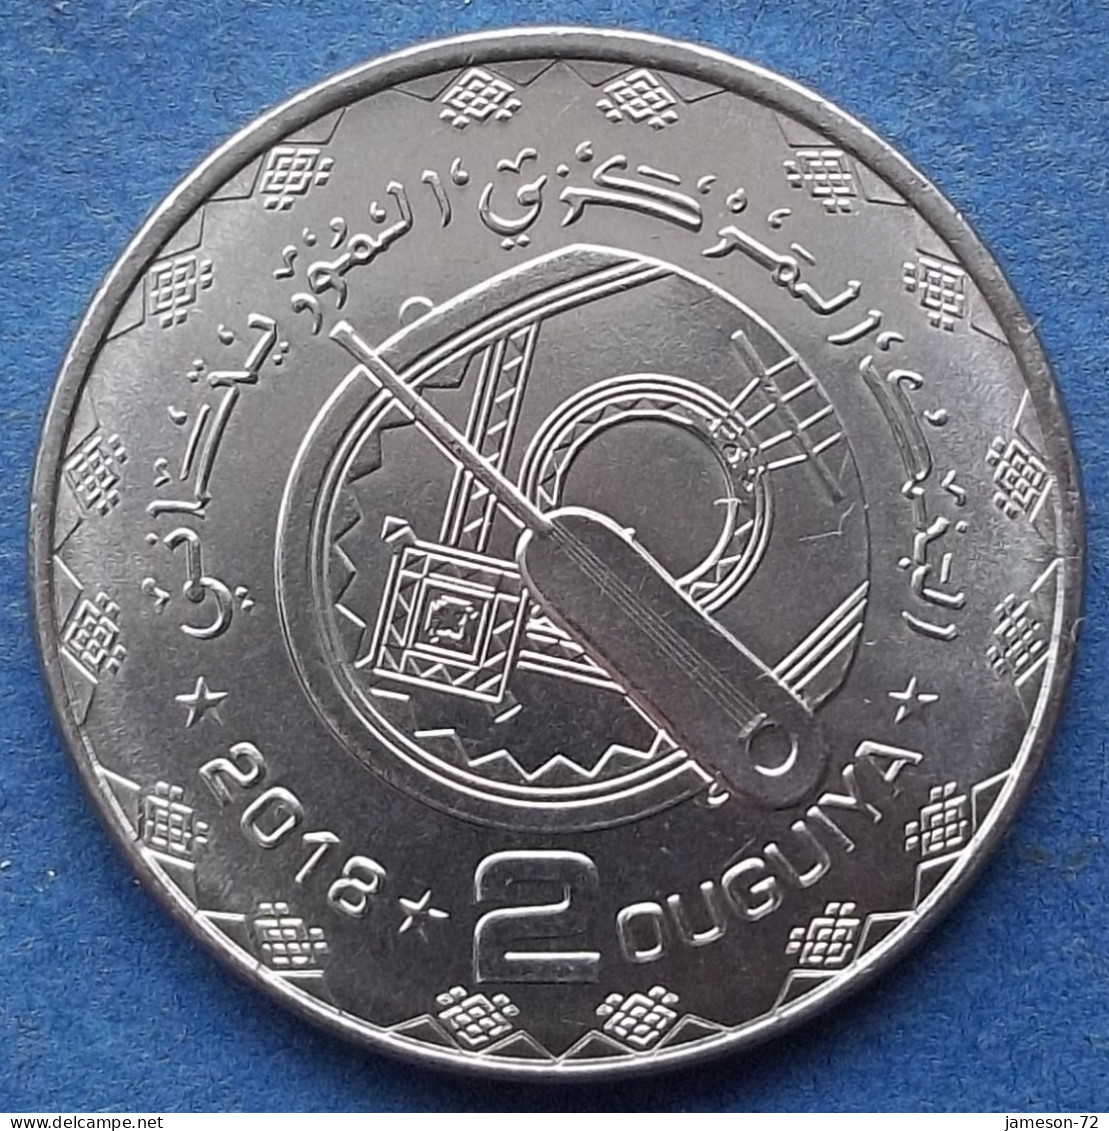 MAURITANIA - 2 Ouguiya AH1440 2018AD "National Instruments" KM# 16 Independent Republic (1960) - Edelweiss Coins - Mauritania